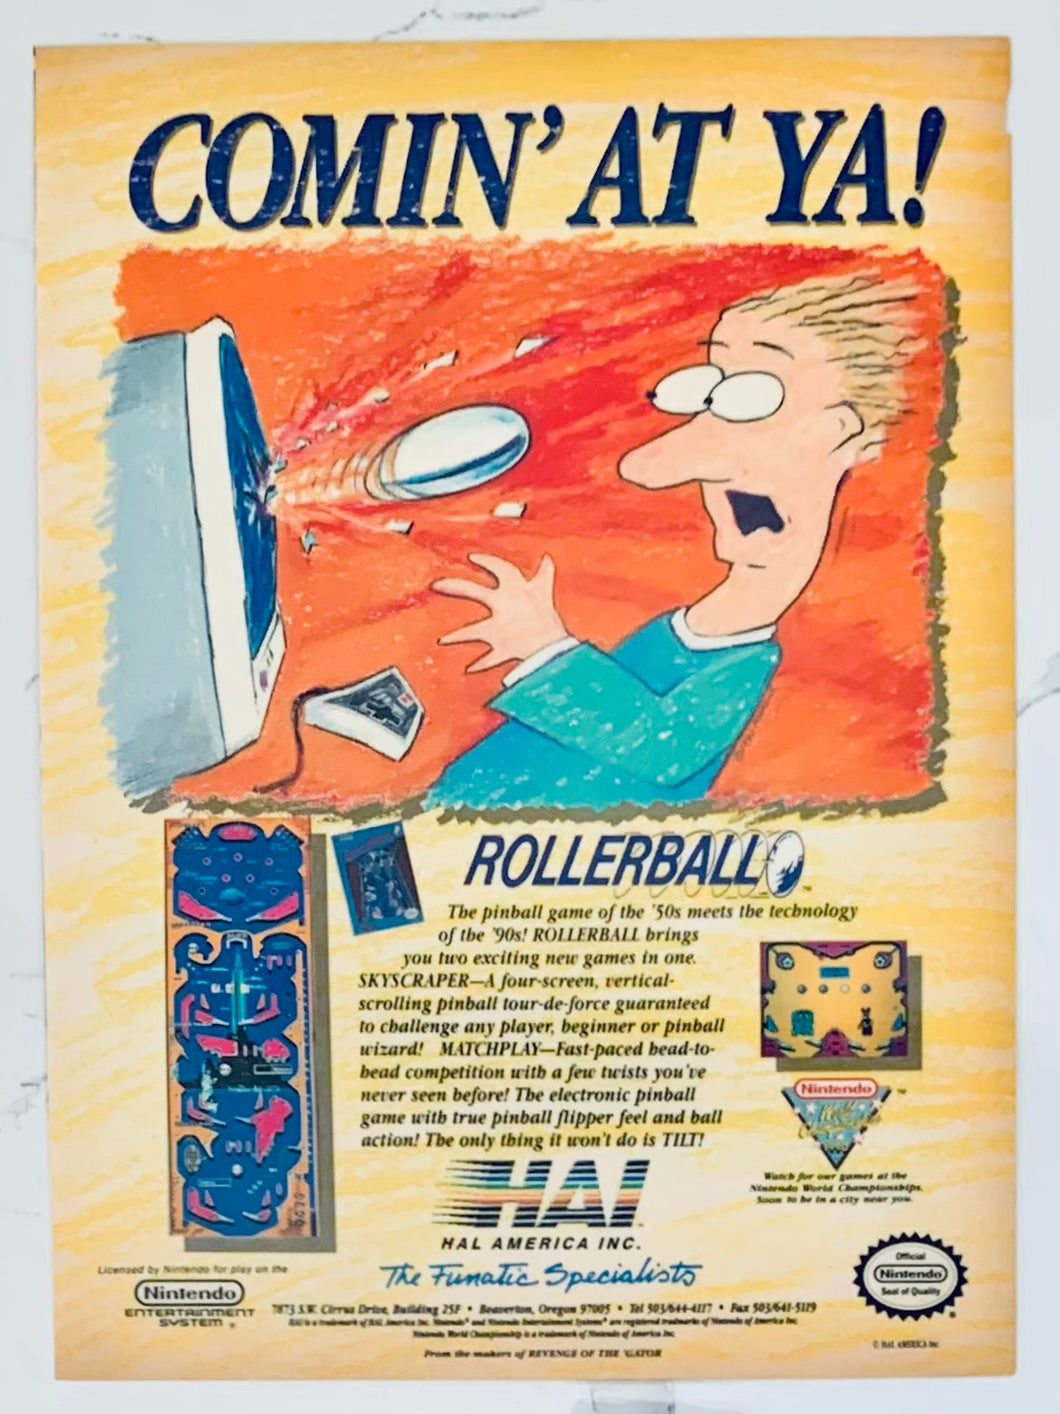 Rollerball - NES - Original Vintage Advertisement - Print Ads - Laminated A4 Poster